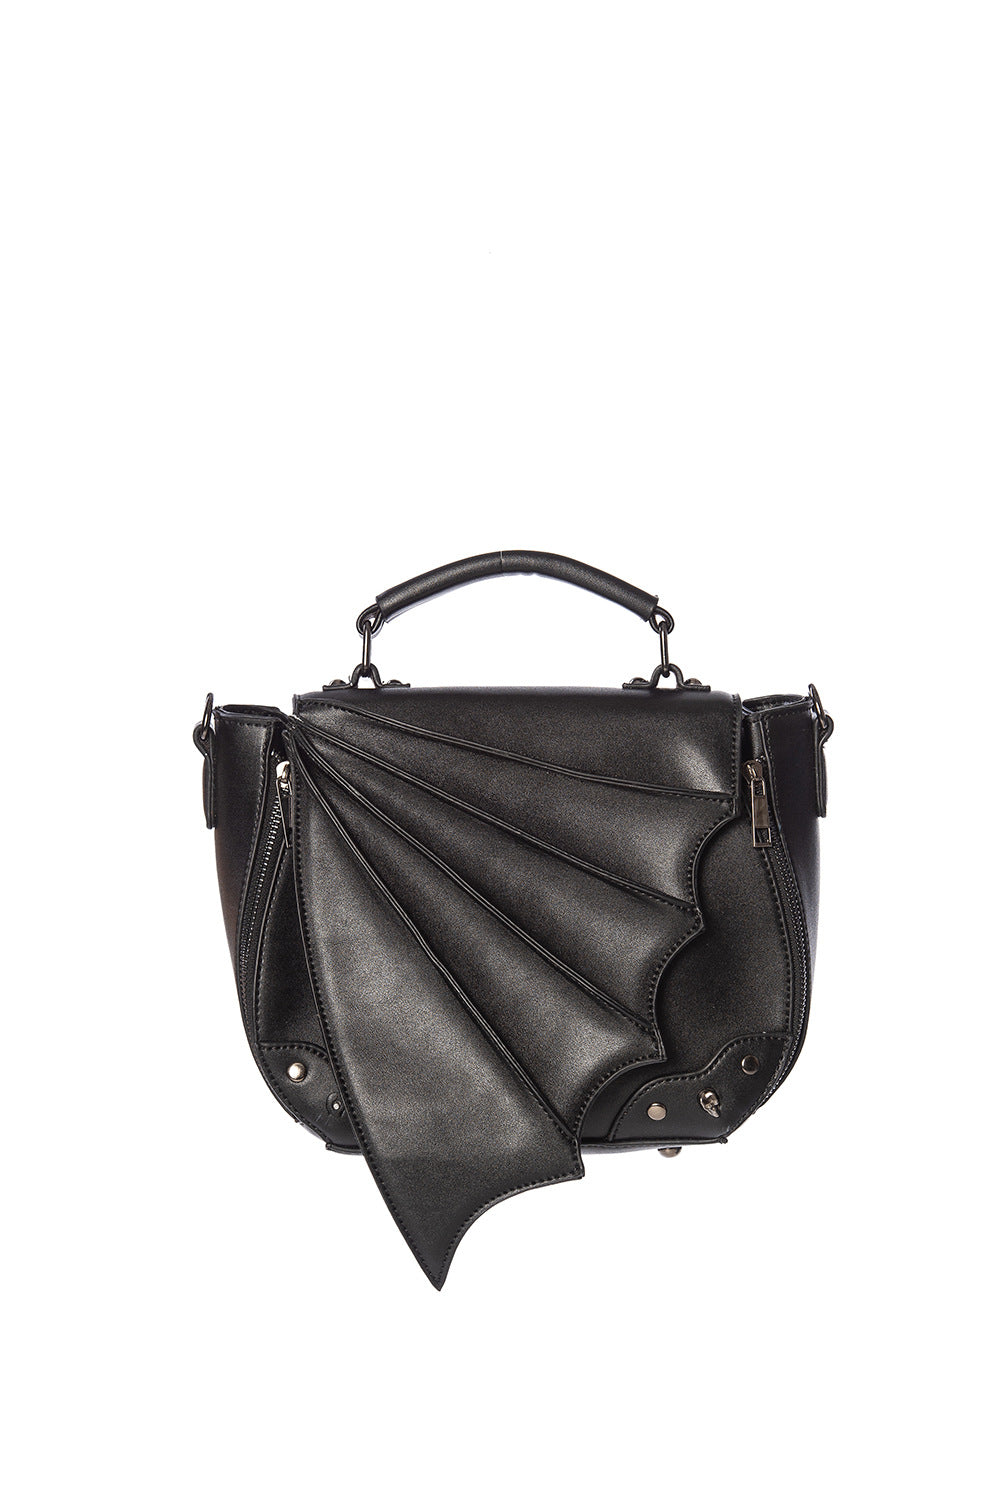 Satchel style handbag in back with bat wing 